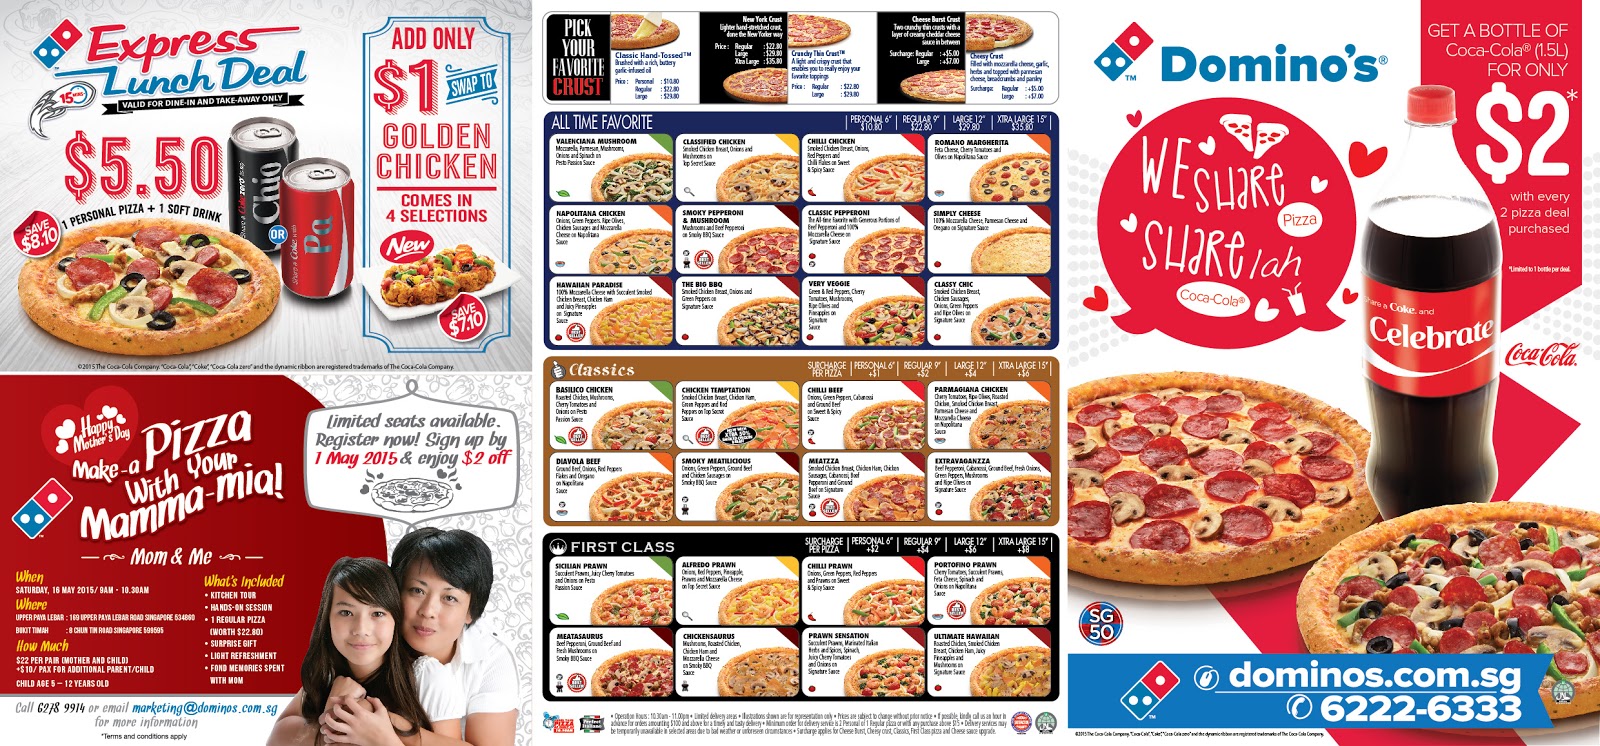 Domino's Pizza Delivery Deals and Express Lunch Promo ...